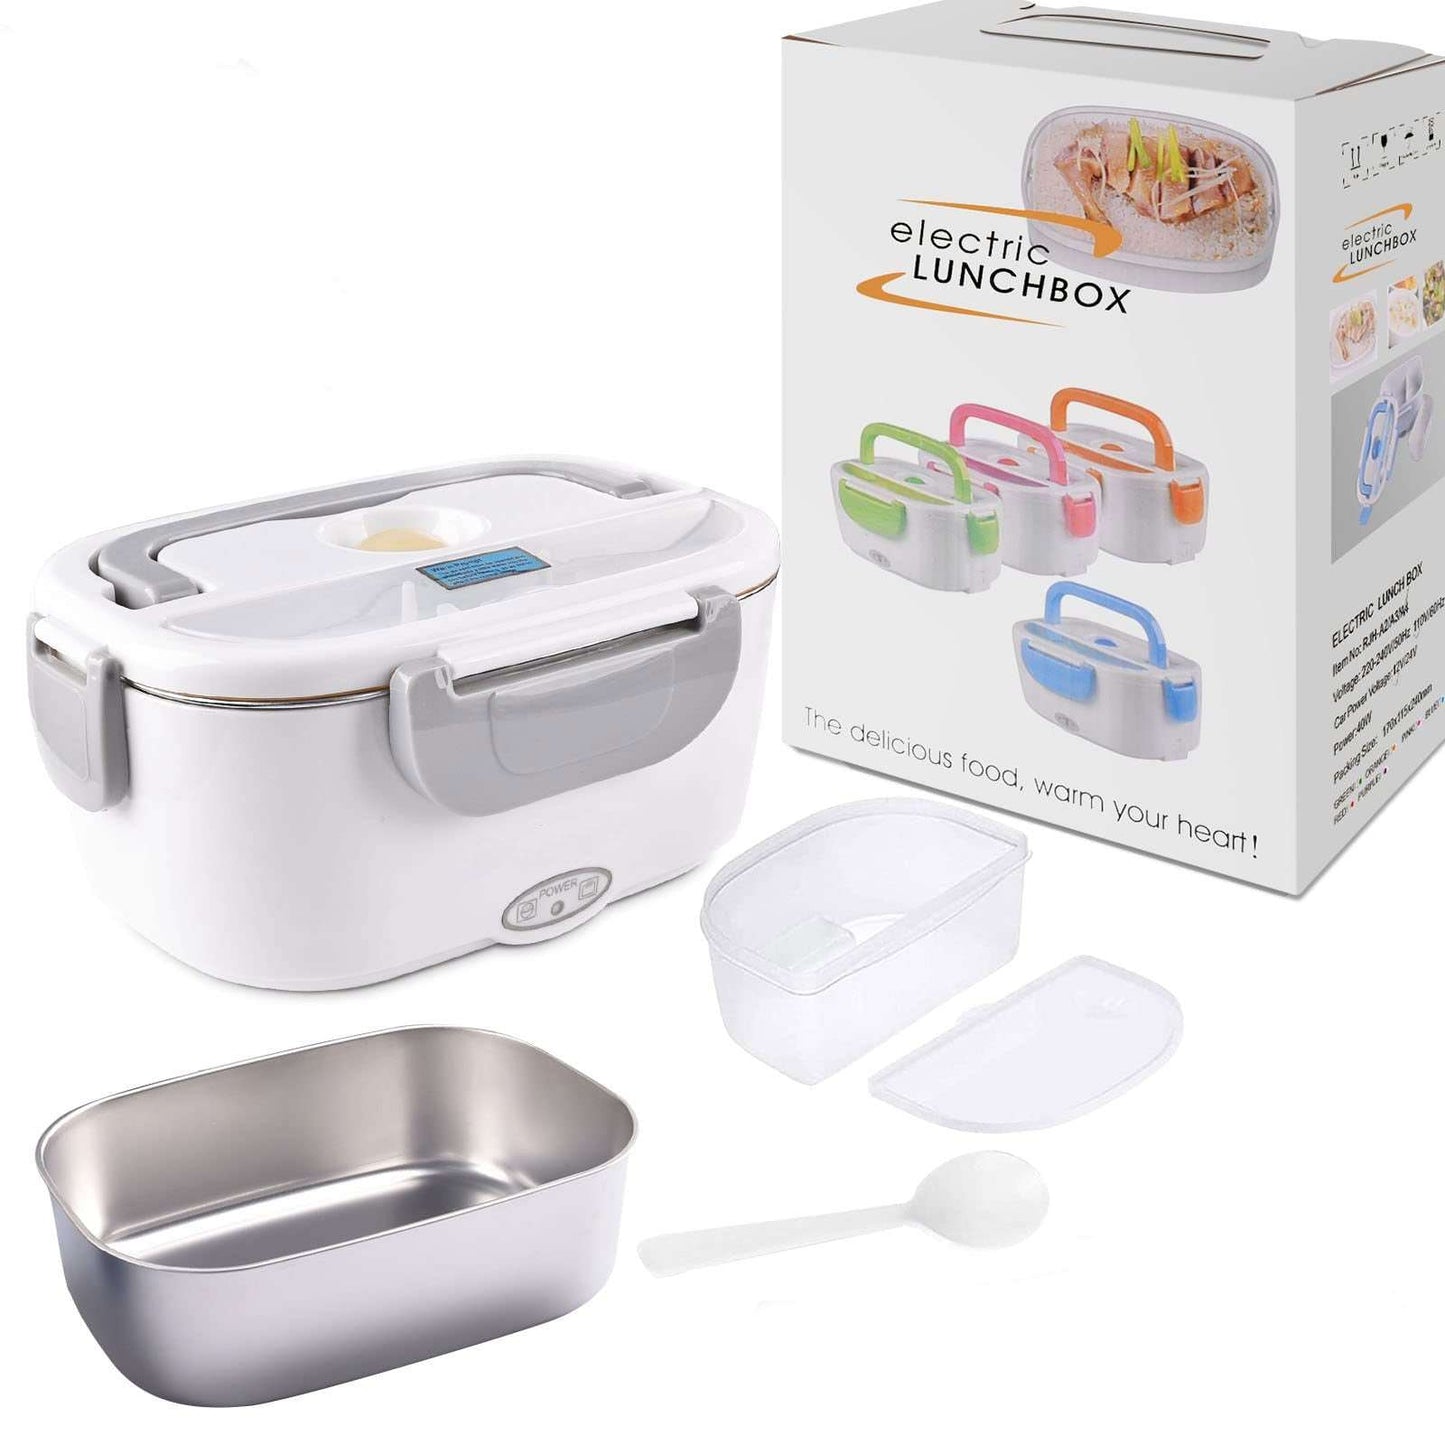 PAPANA 2-In-1 Electric Heating Lunch Box Car + Home 12V 220/110V Portable Stainless Steel Liner Bento Lunchbox Food Container Bento Box